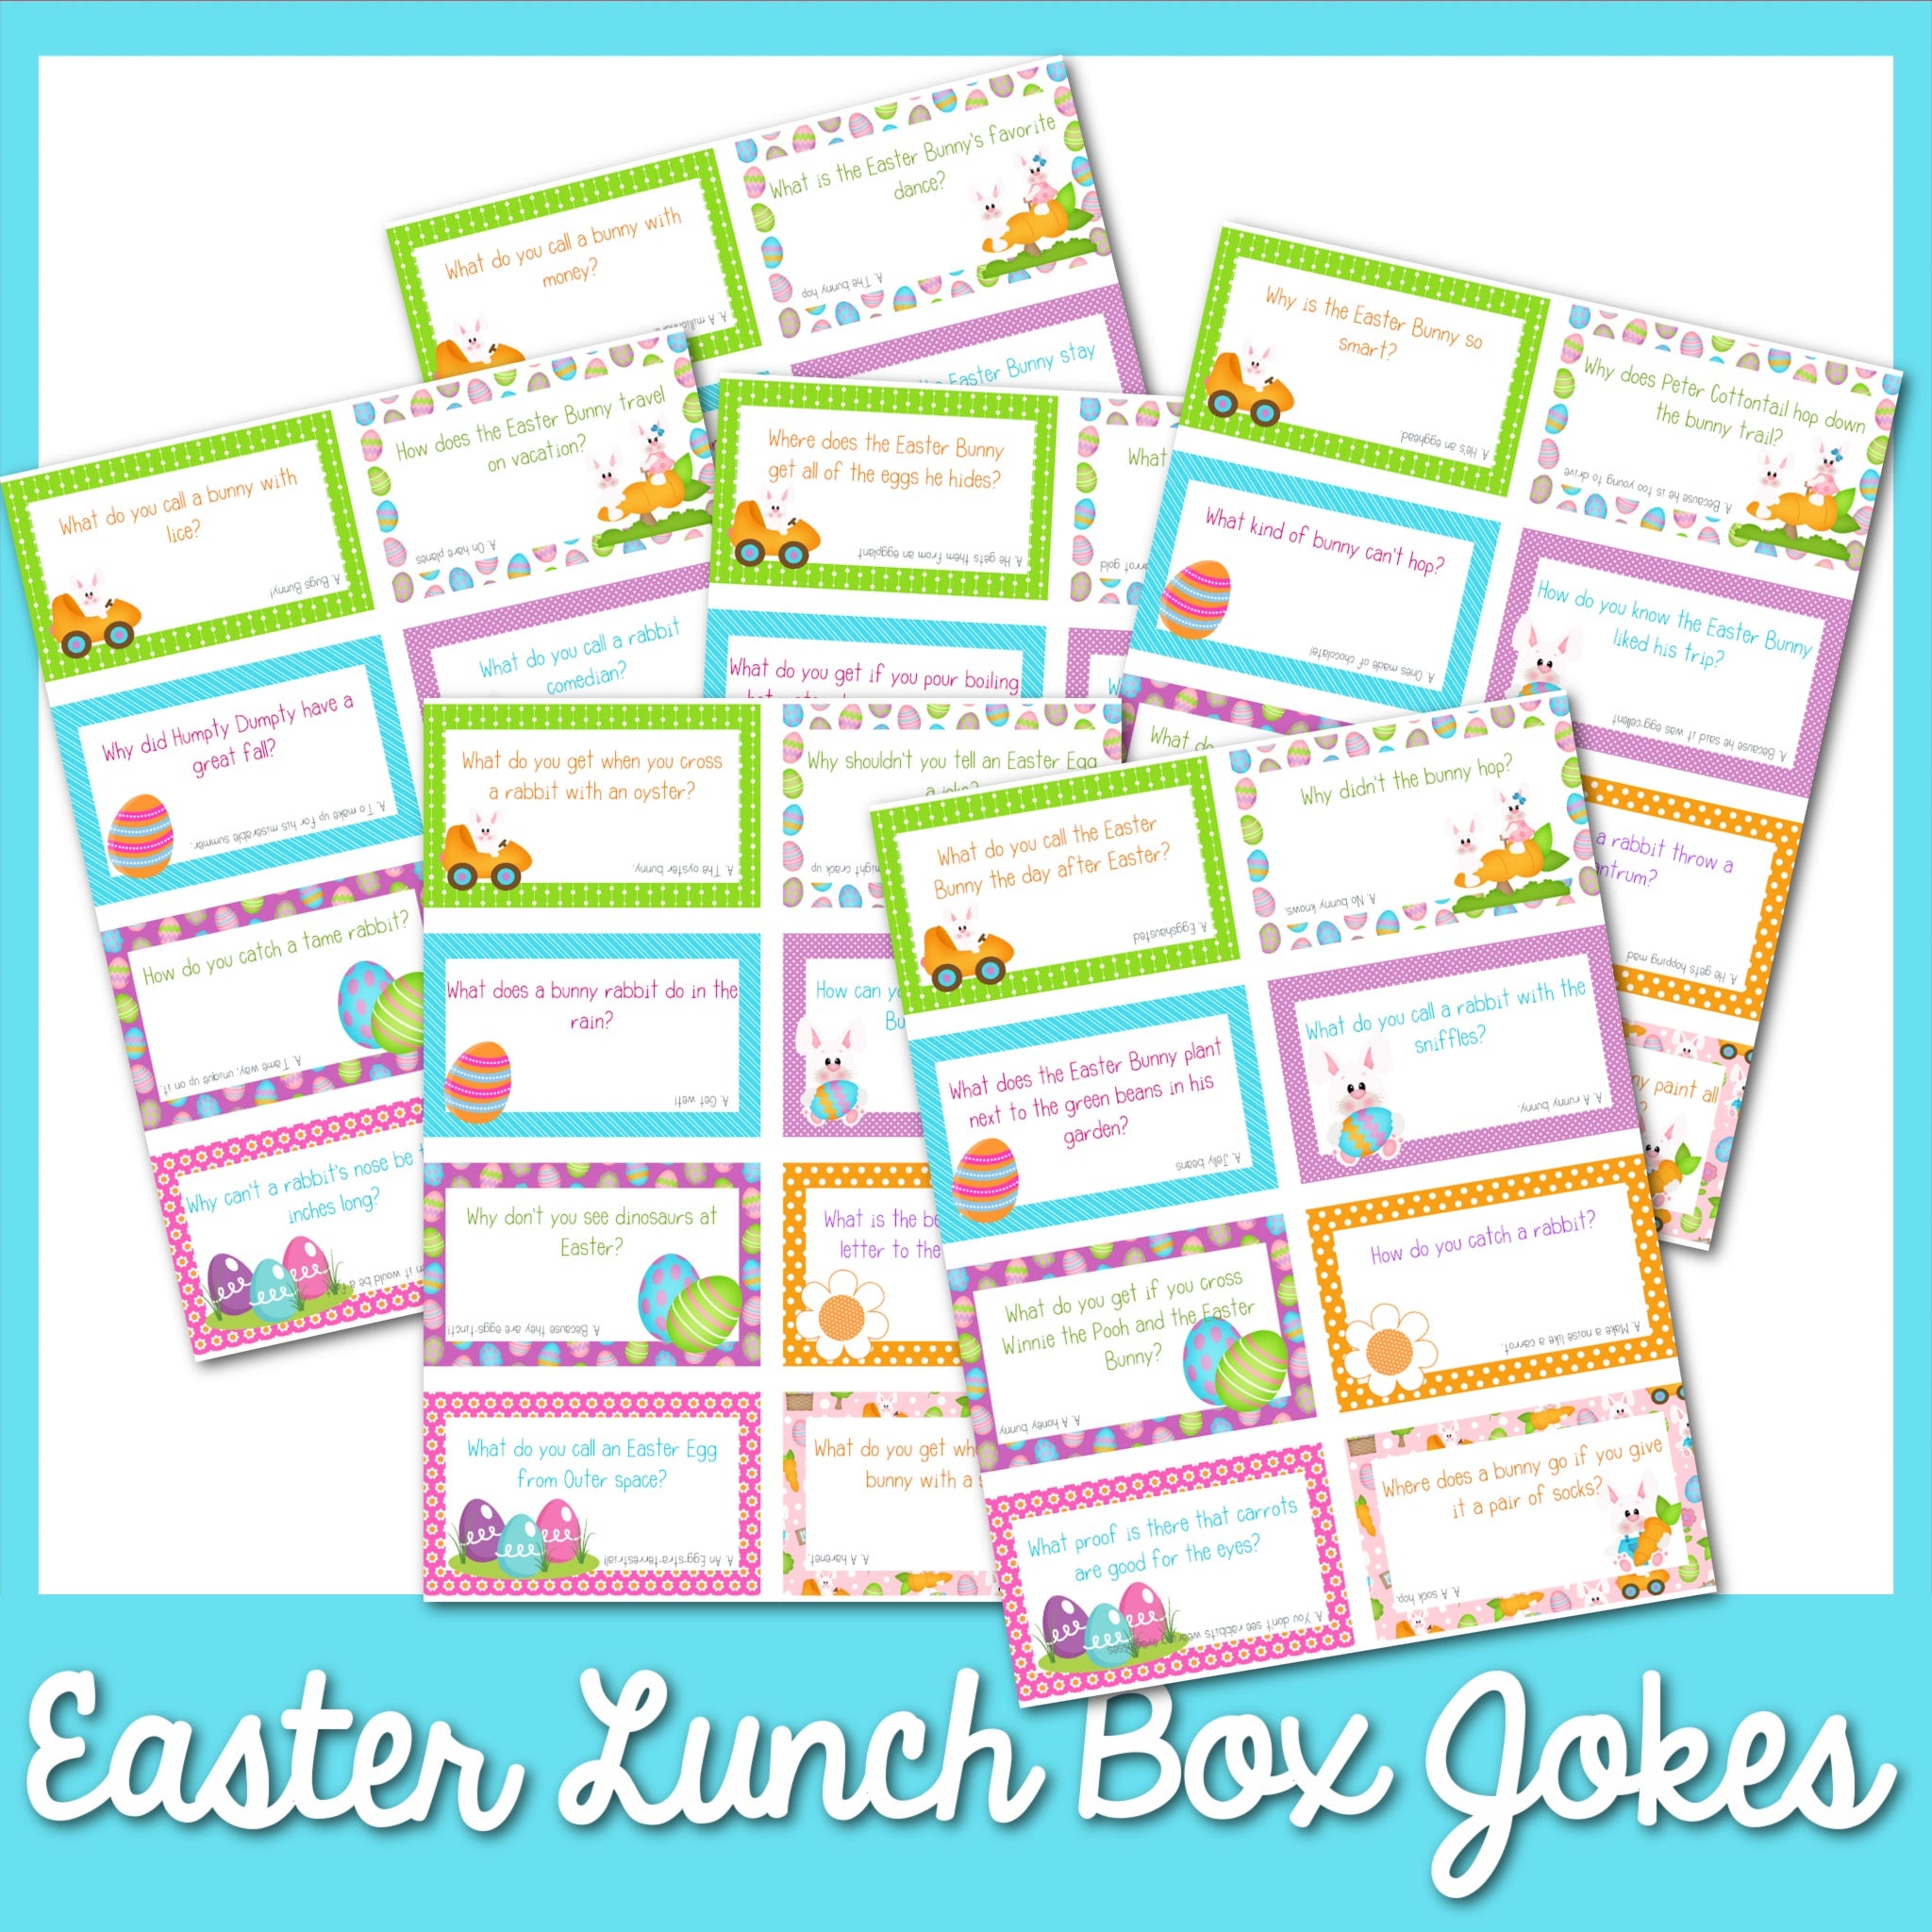 50+ Easter Jokes + Printable Lunch Box Cards